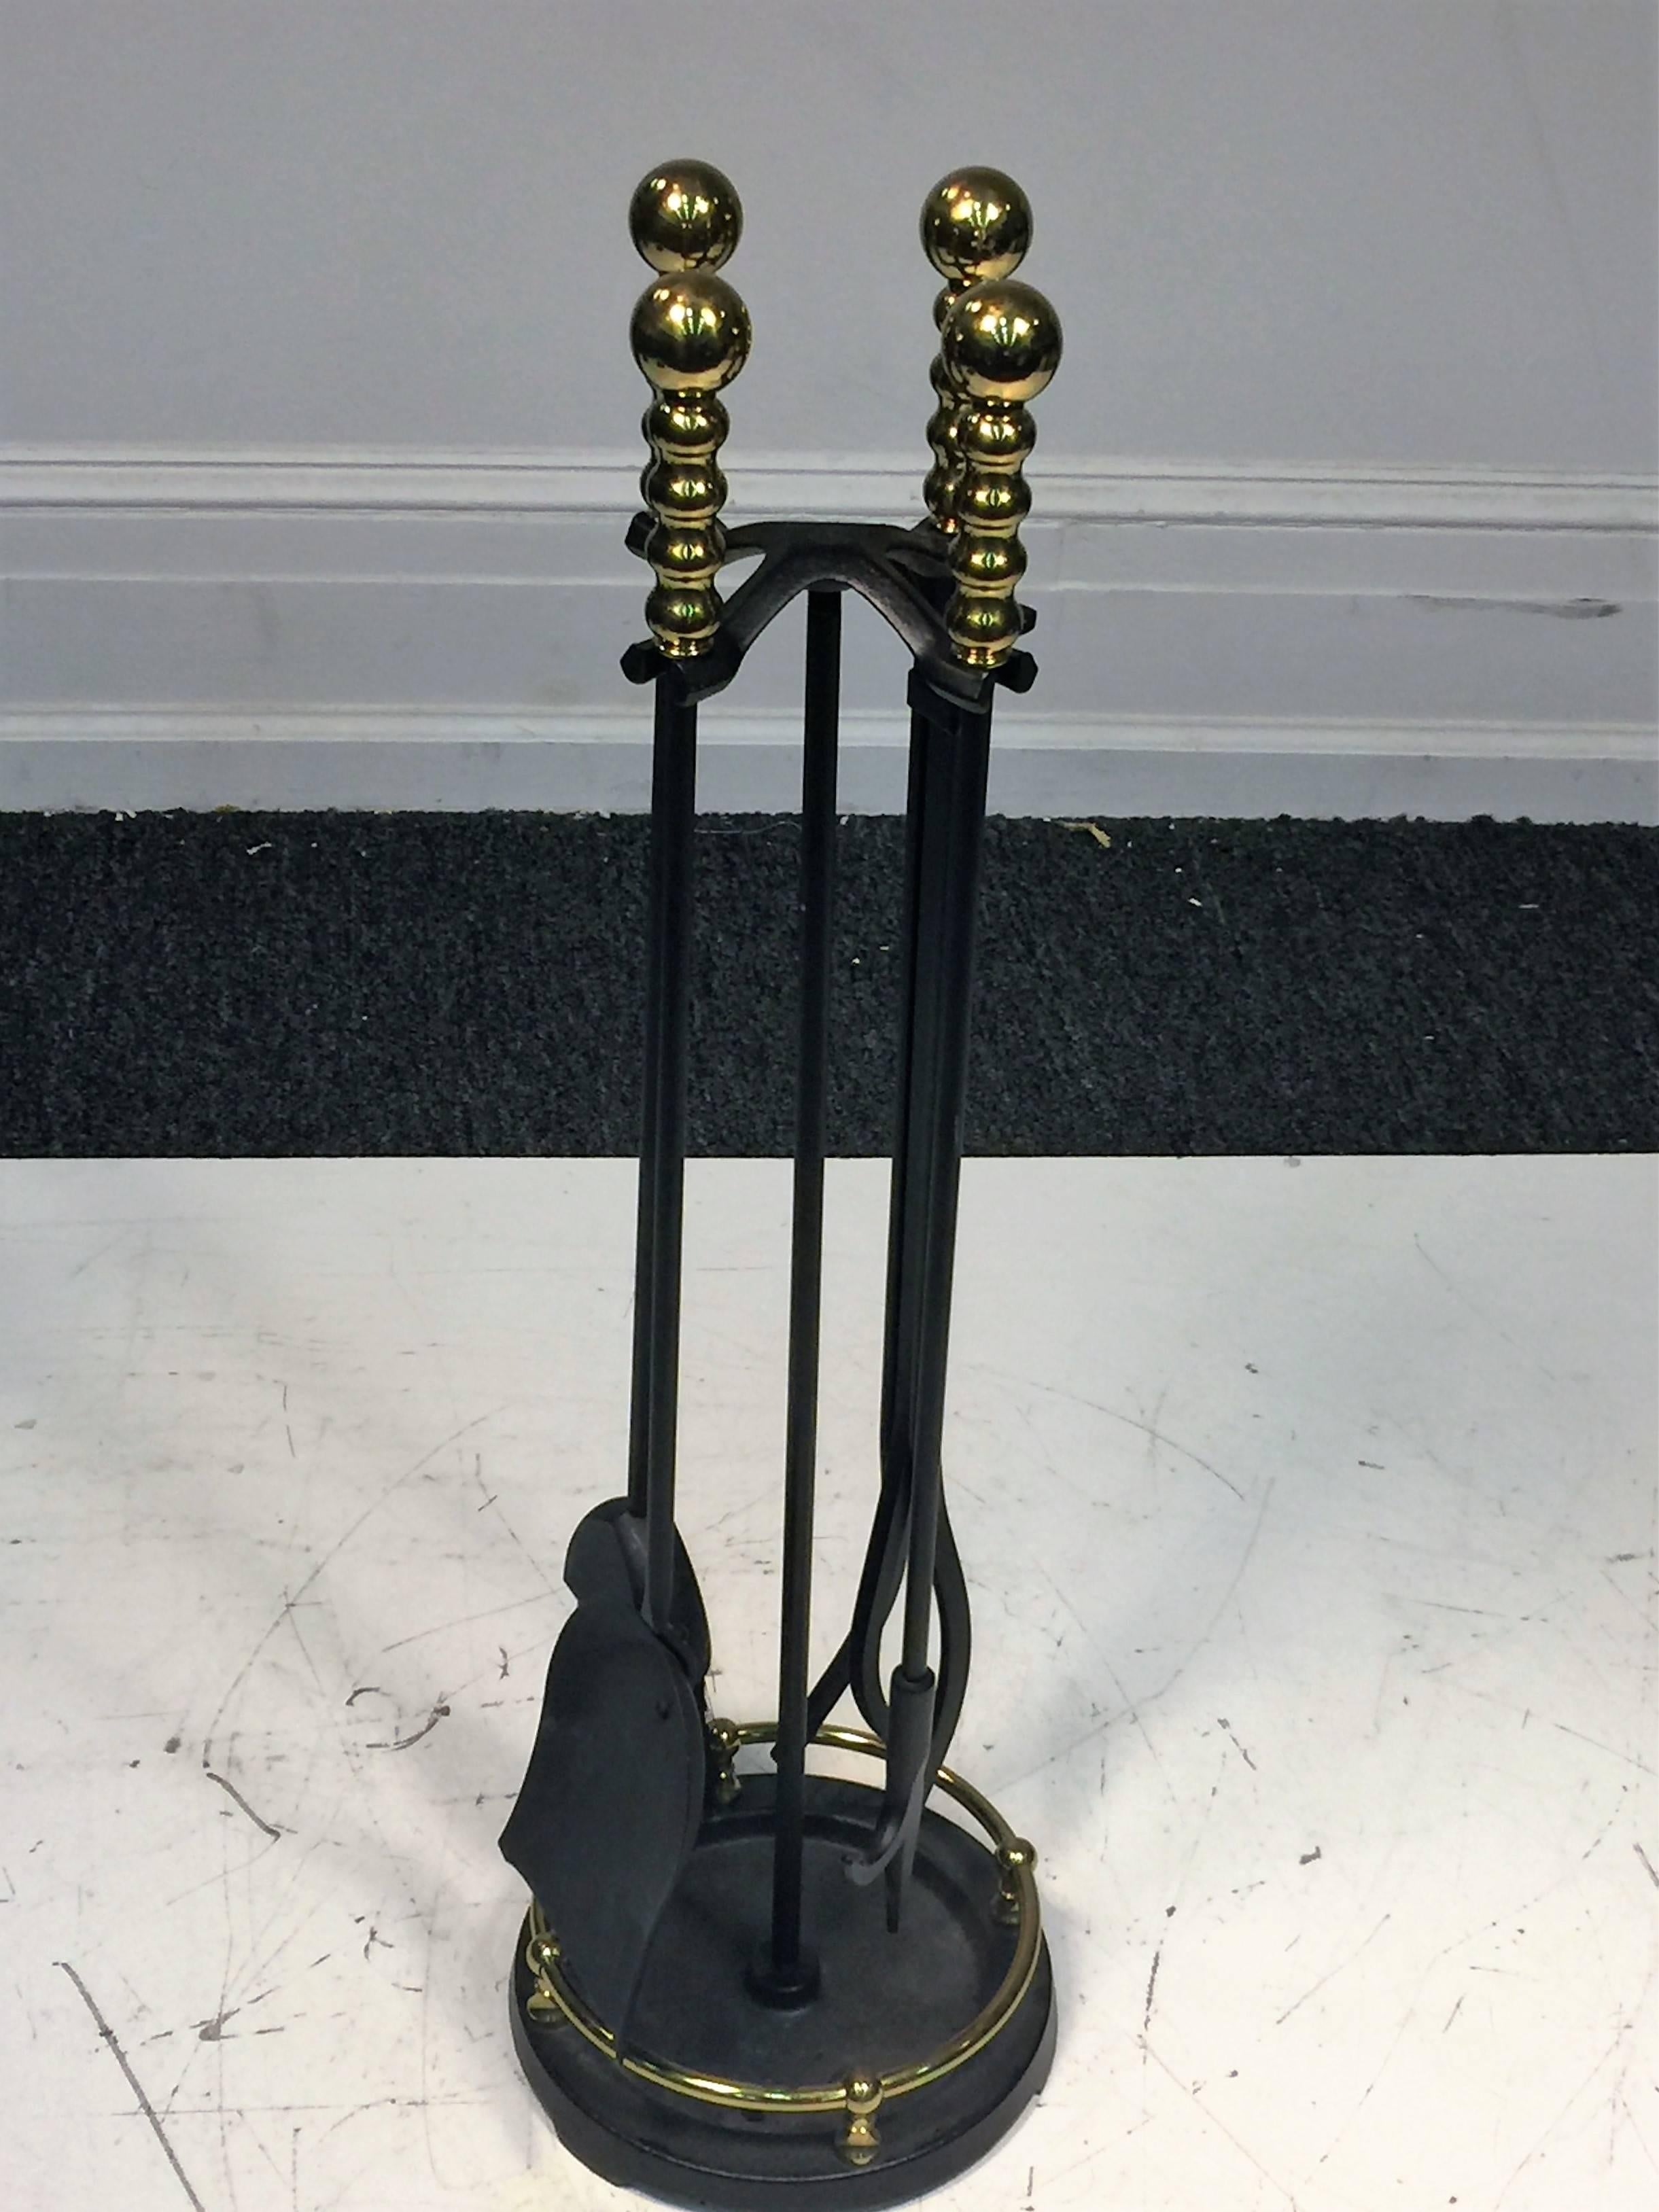 Great four piece fire tool set with brass ball handles and black enamel iron stand. Decorated with a brass gallery on the black iron round base. Each fire tool measures at 28